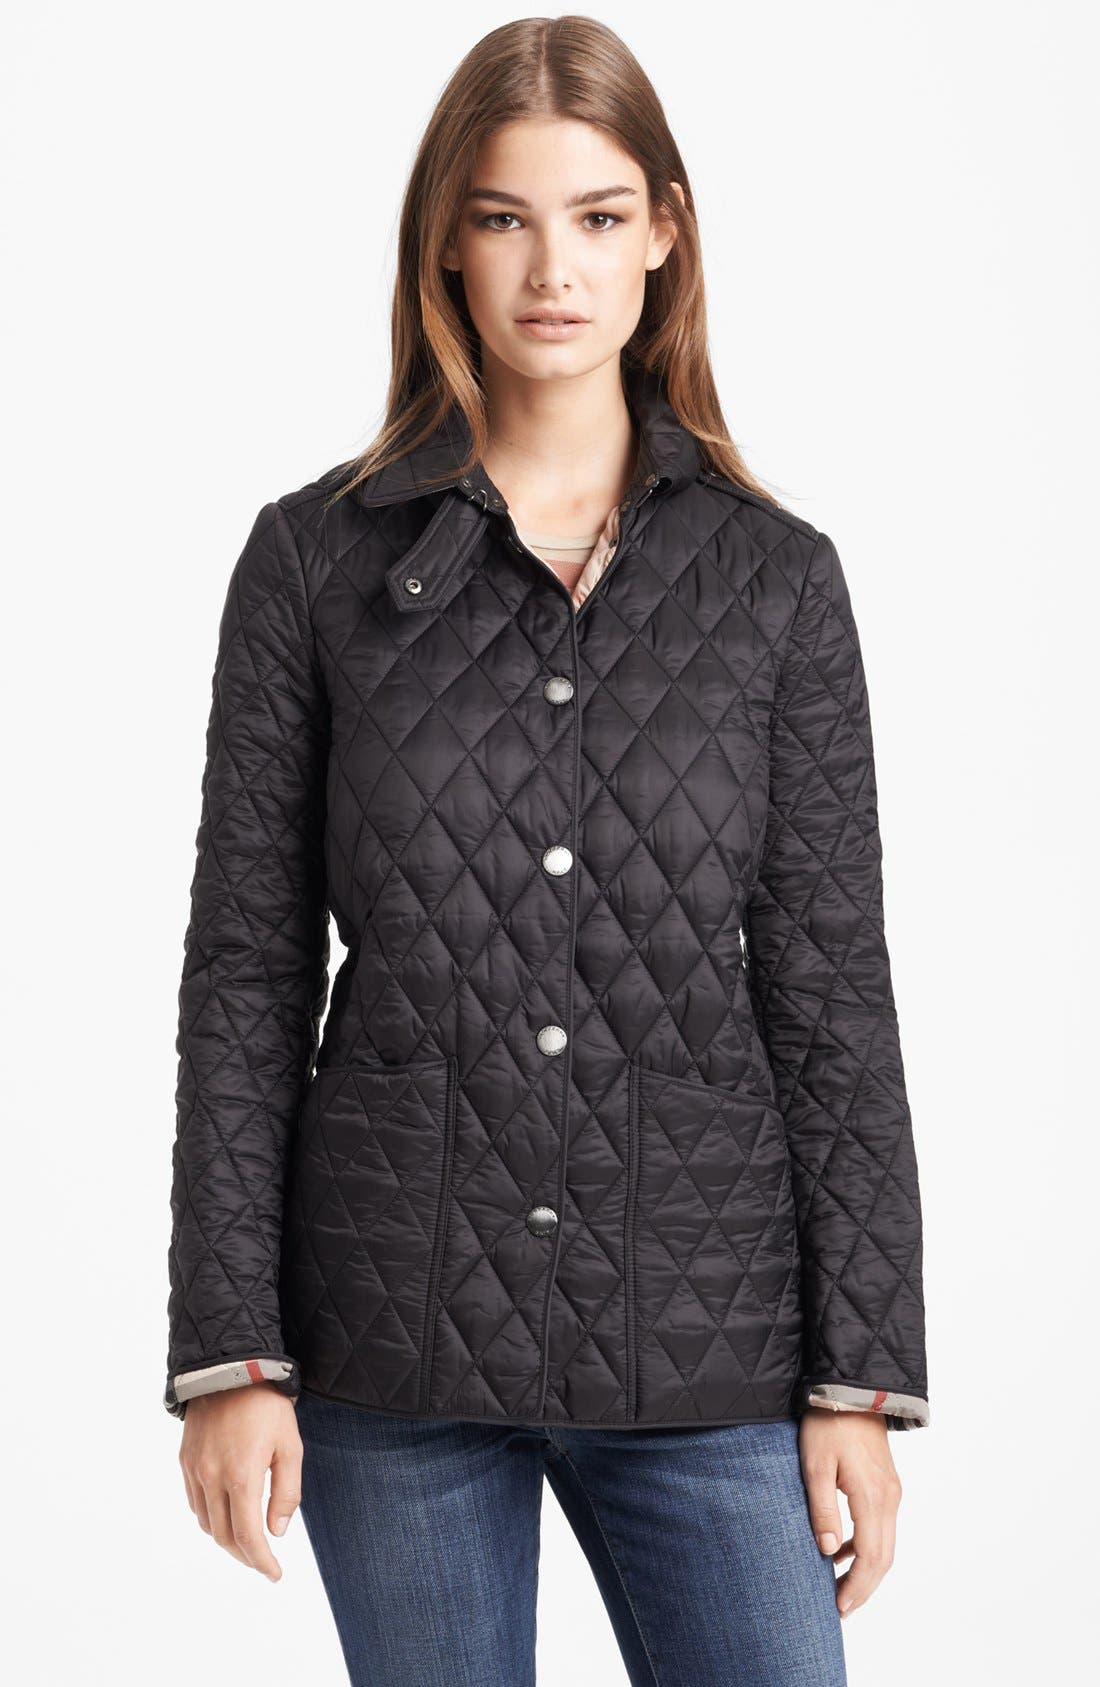 Burberry Brit 'Pirmont' Quilted Jacket 